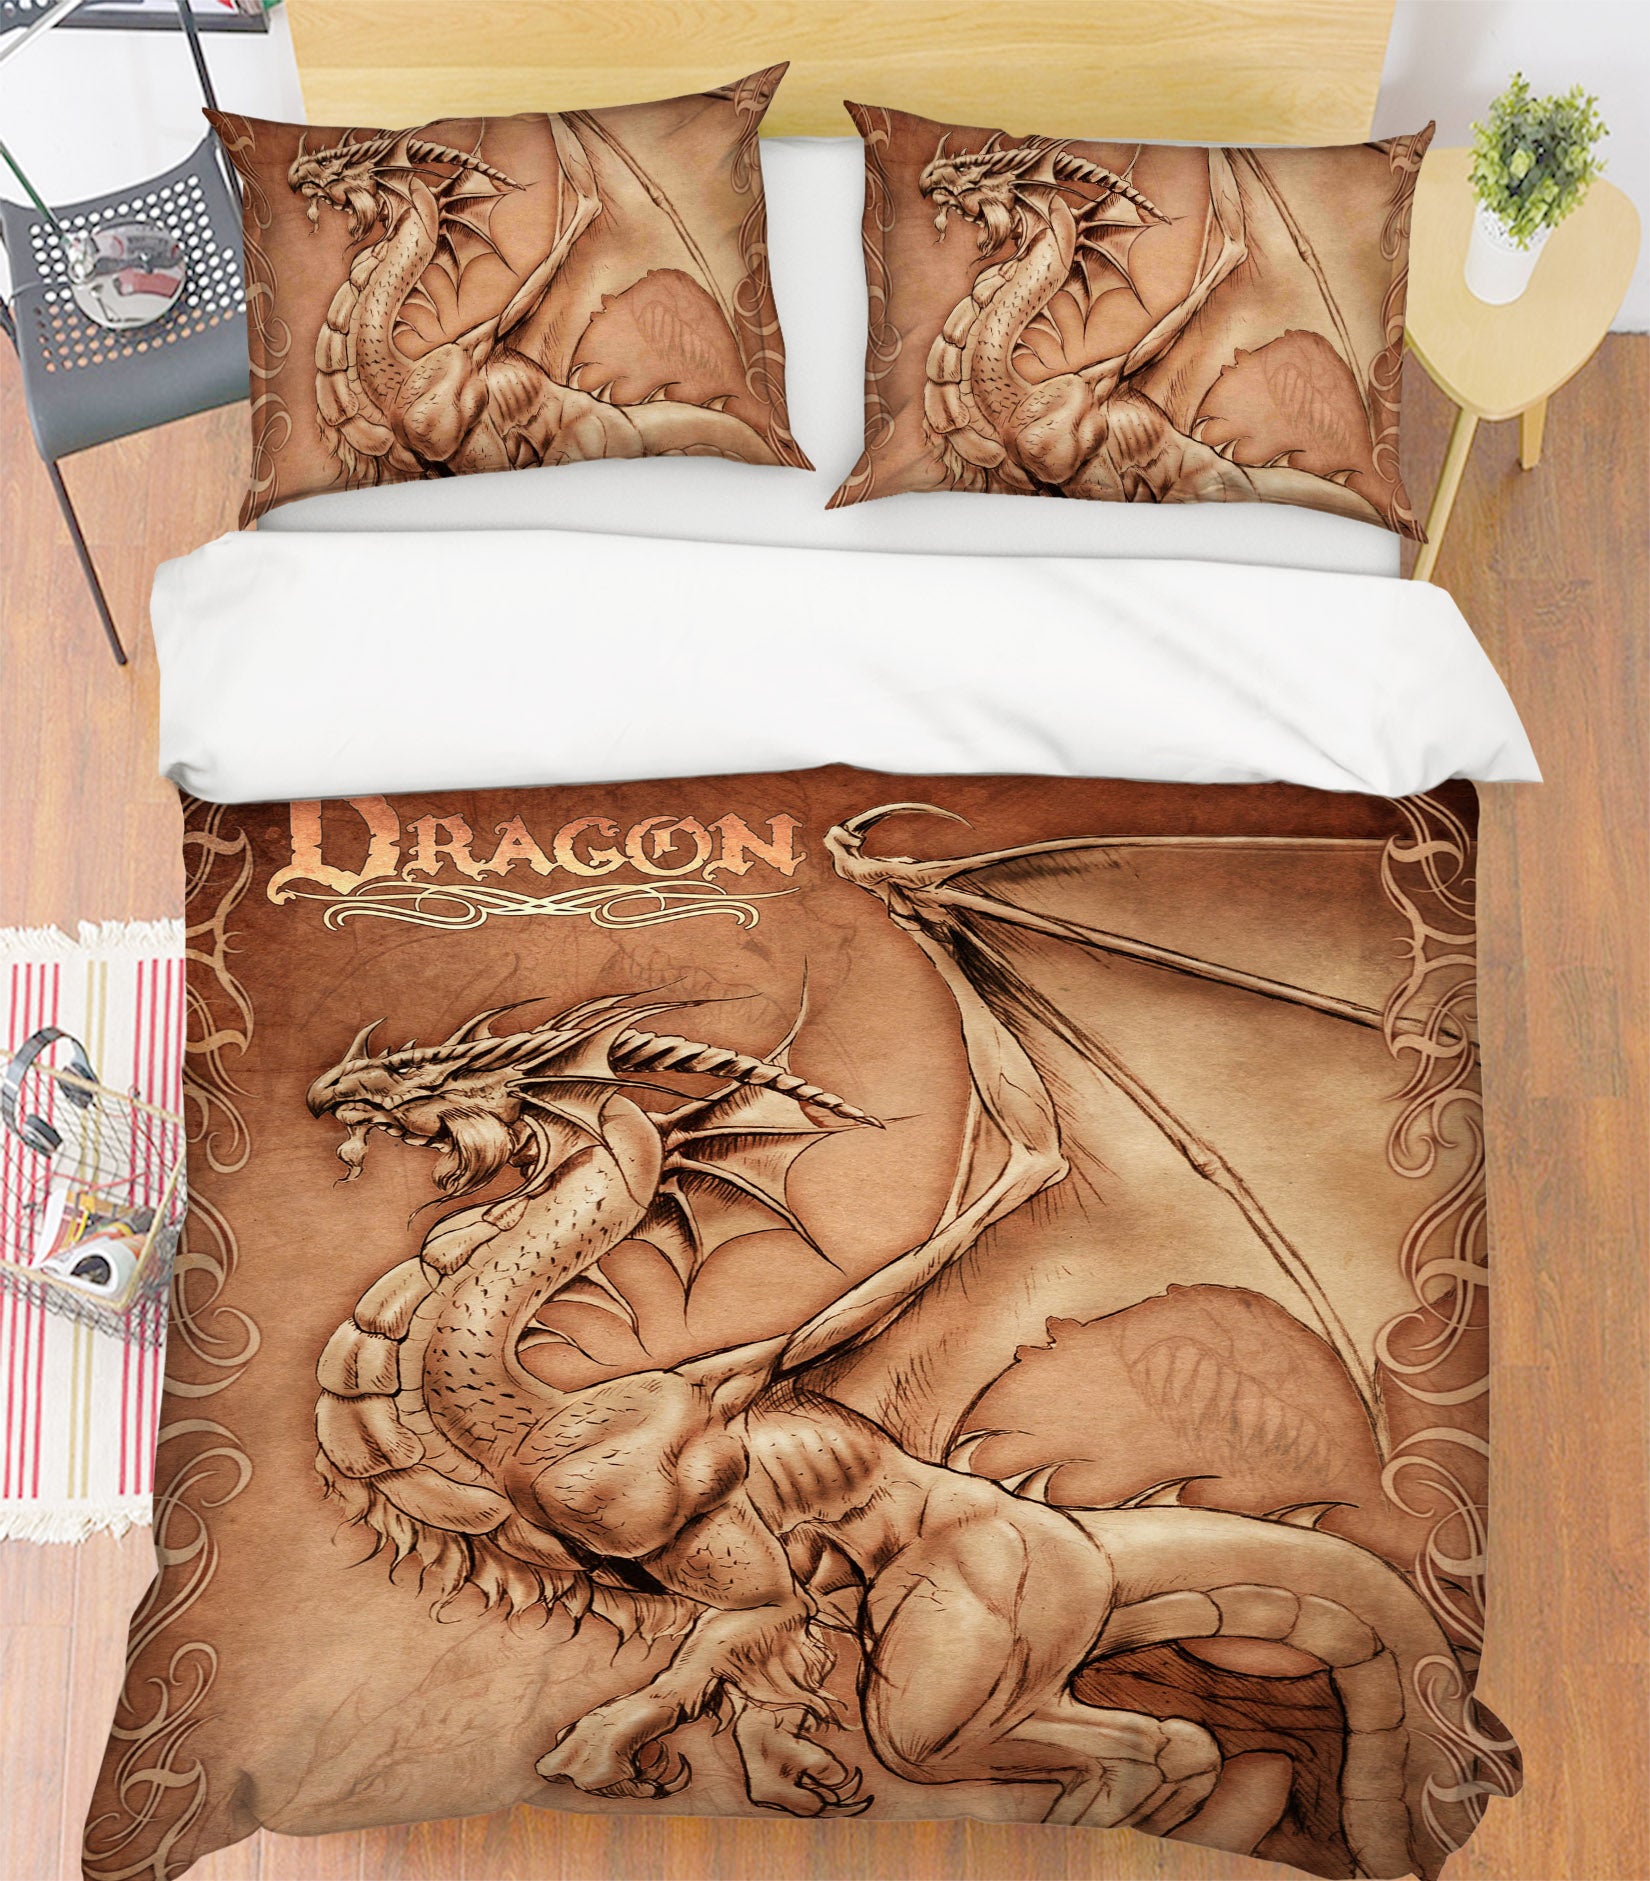 3D Dragon Painting 4084 Tom Wood Bedding Bed Pillowcases Quilt